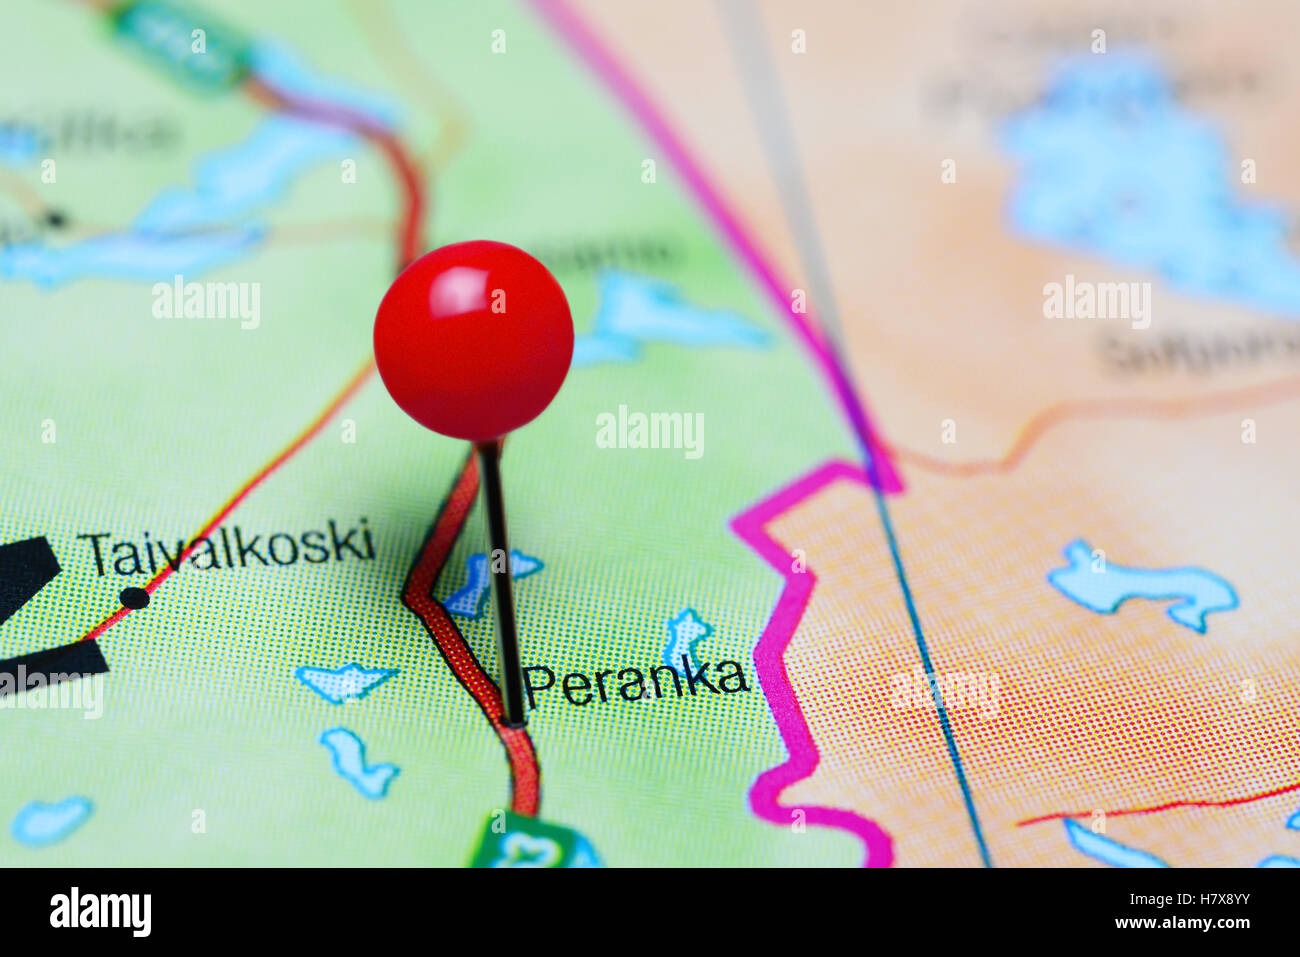 Peranka pinned on a map of Finland Stock Photo